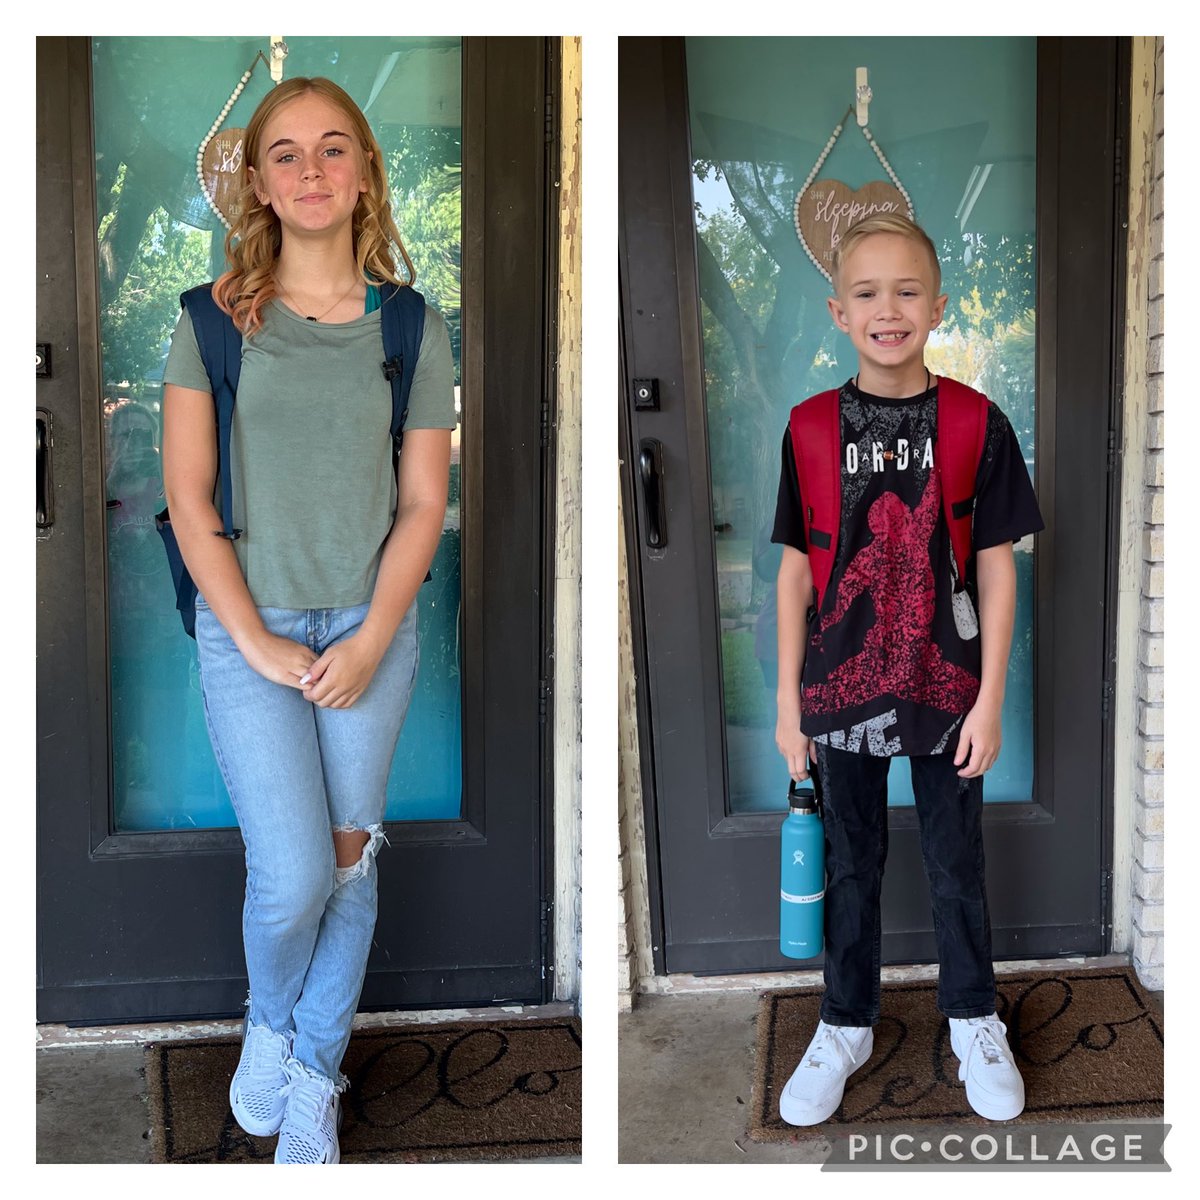 Happy first day of school! A Sophomore and a 5th grader! #risdgreatness